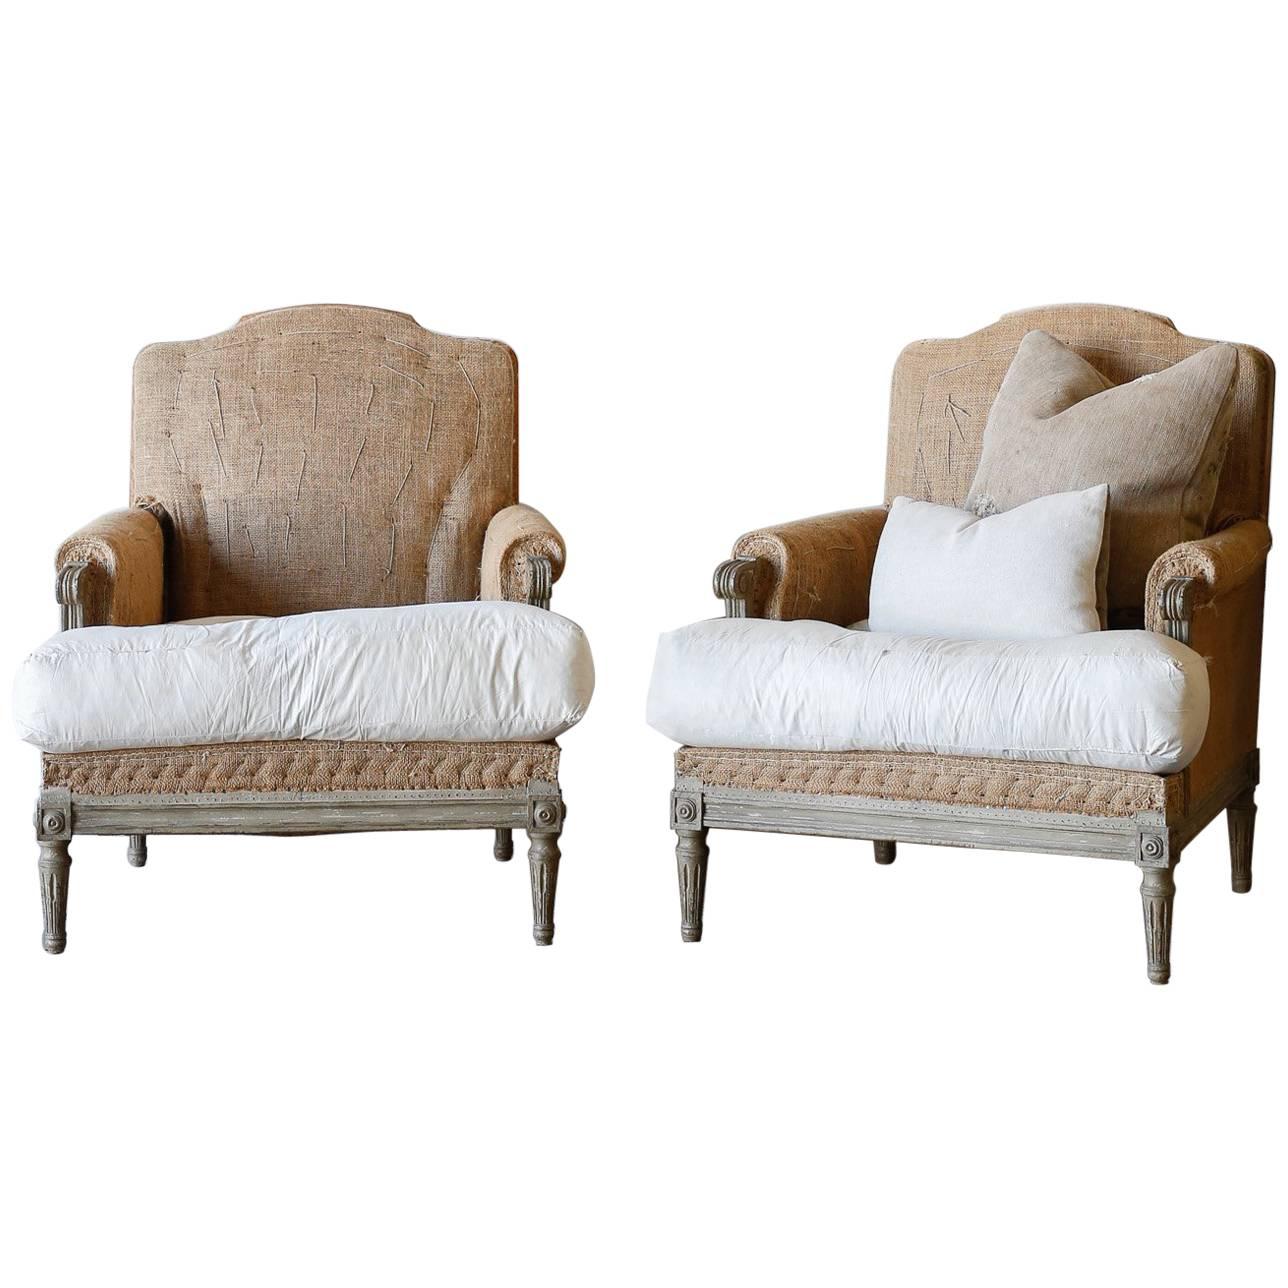 Pair of Antique Bergeres with Feather Cushions For Sale